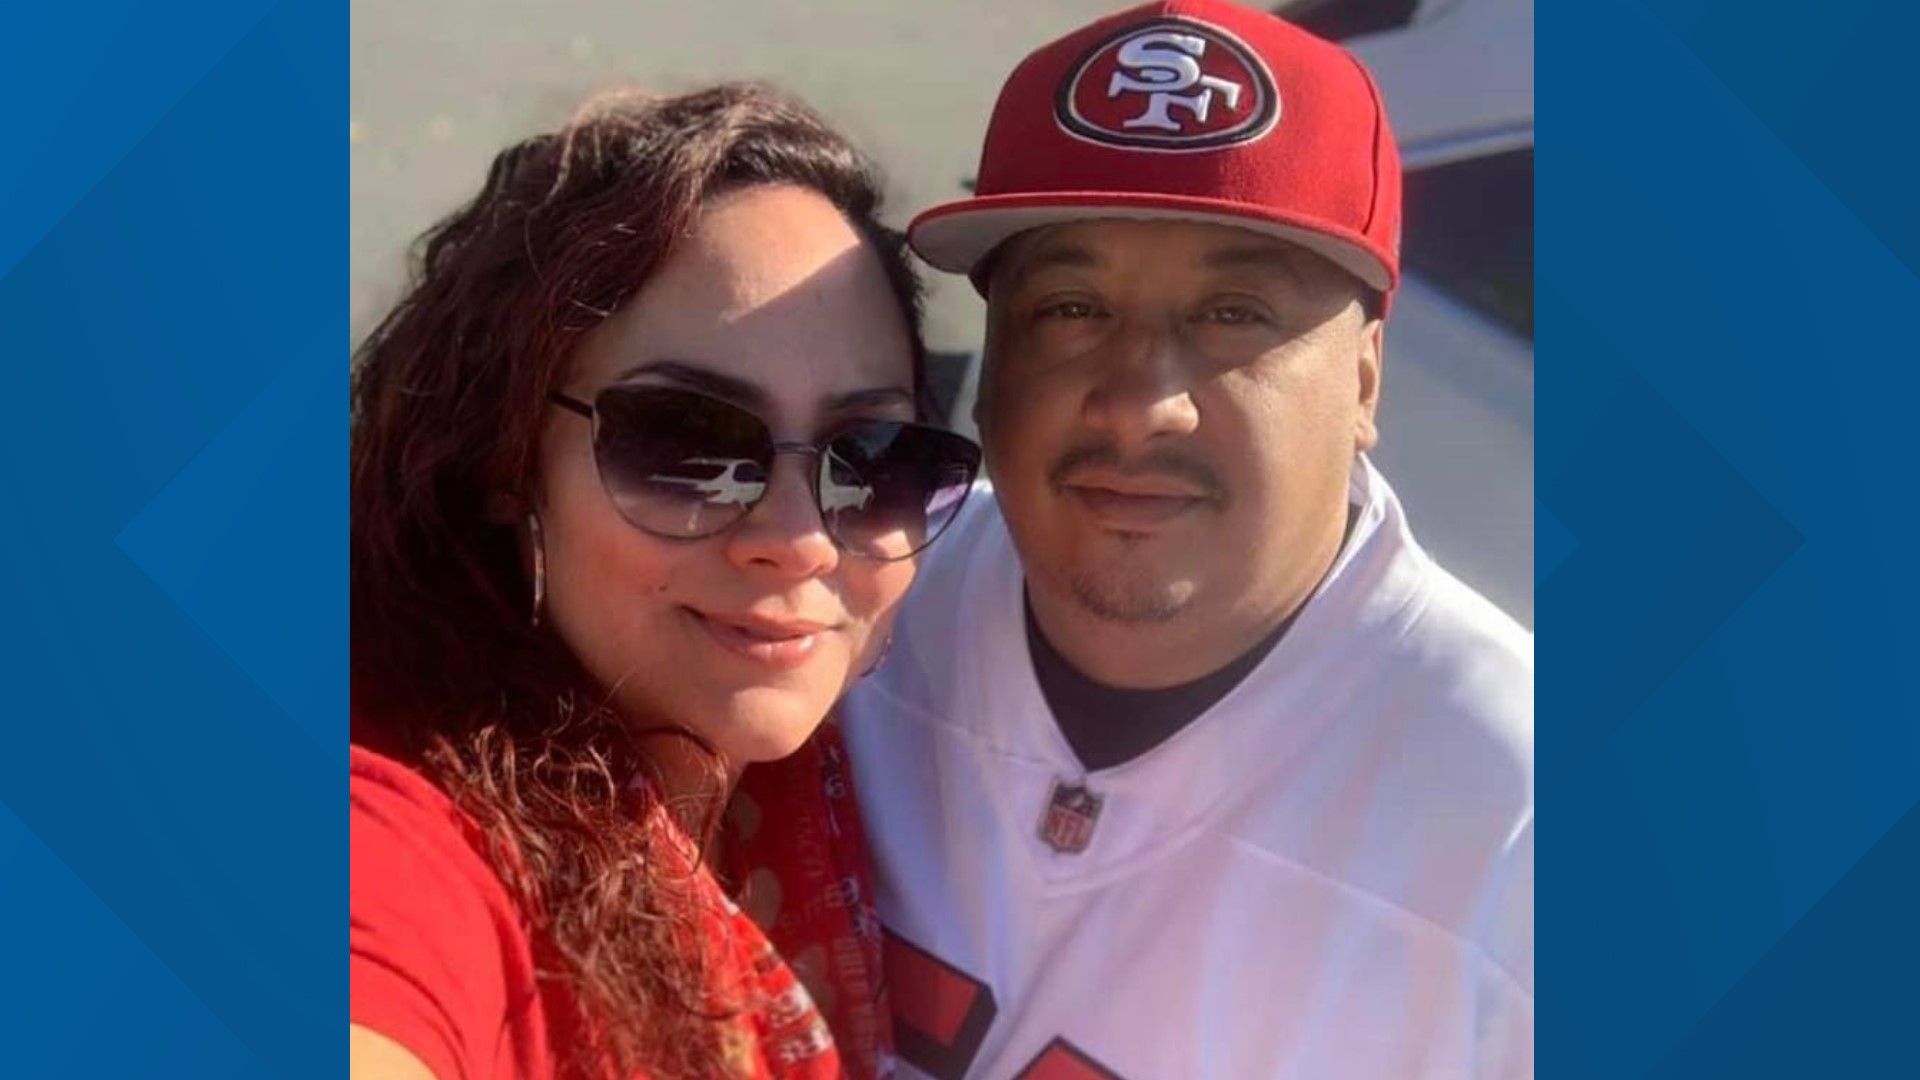 A Fairfield father was shot and killed during an early morning fight last month, protecting his son from attackers, his wife said Monday.